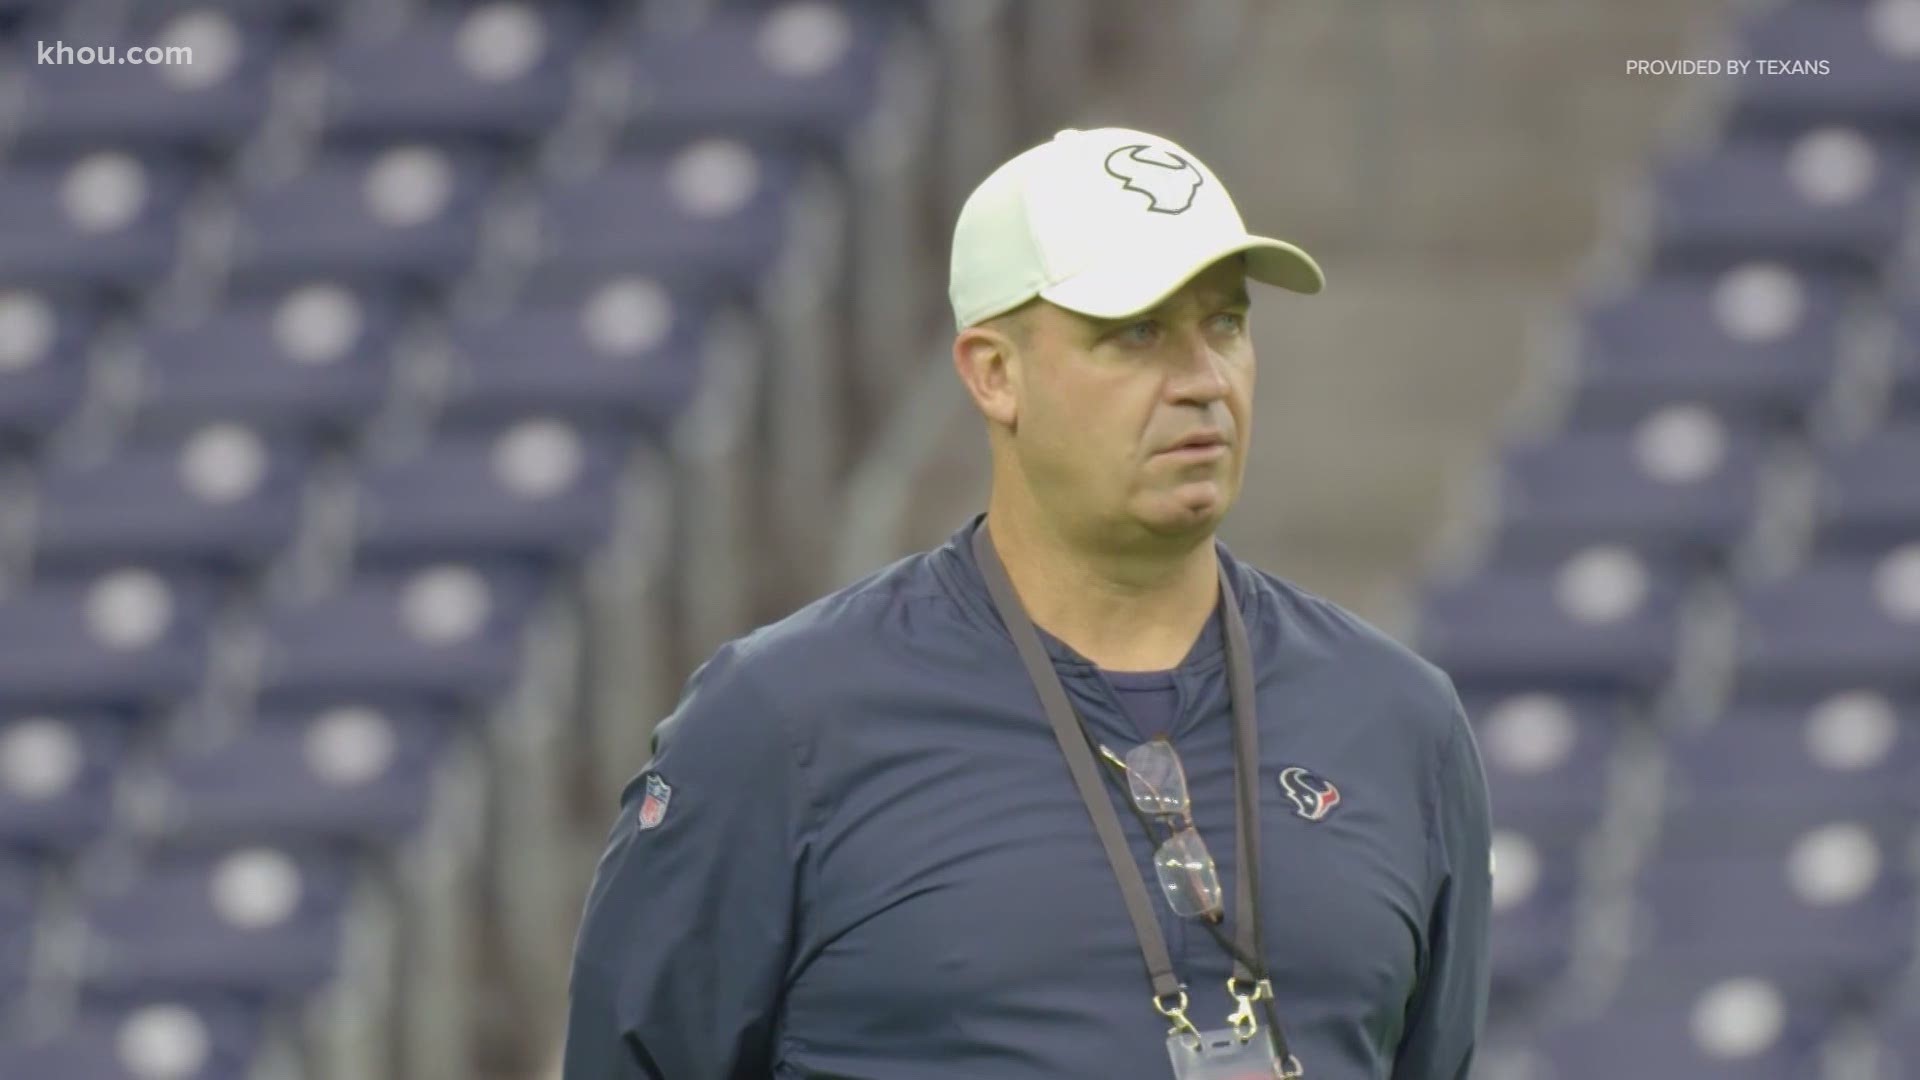 The Houston Texans fired head coach and general manager Bill O'Brien after an 0-4 start to the 2020 season.